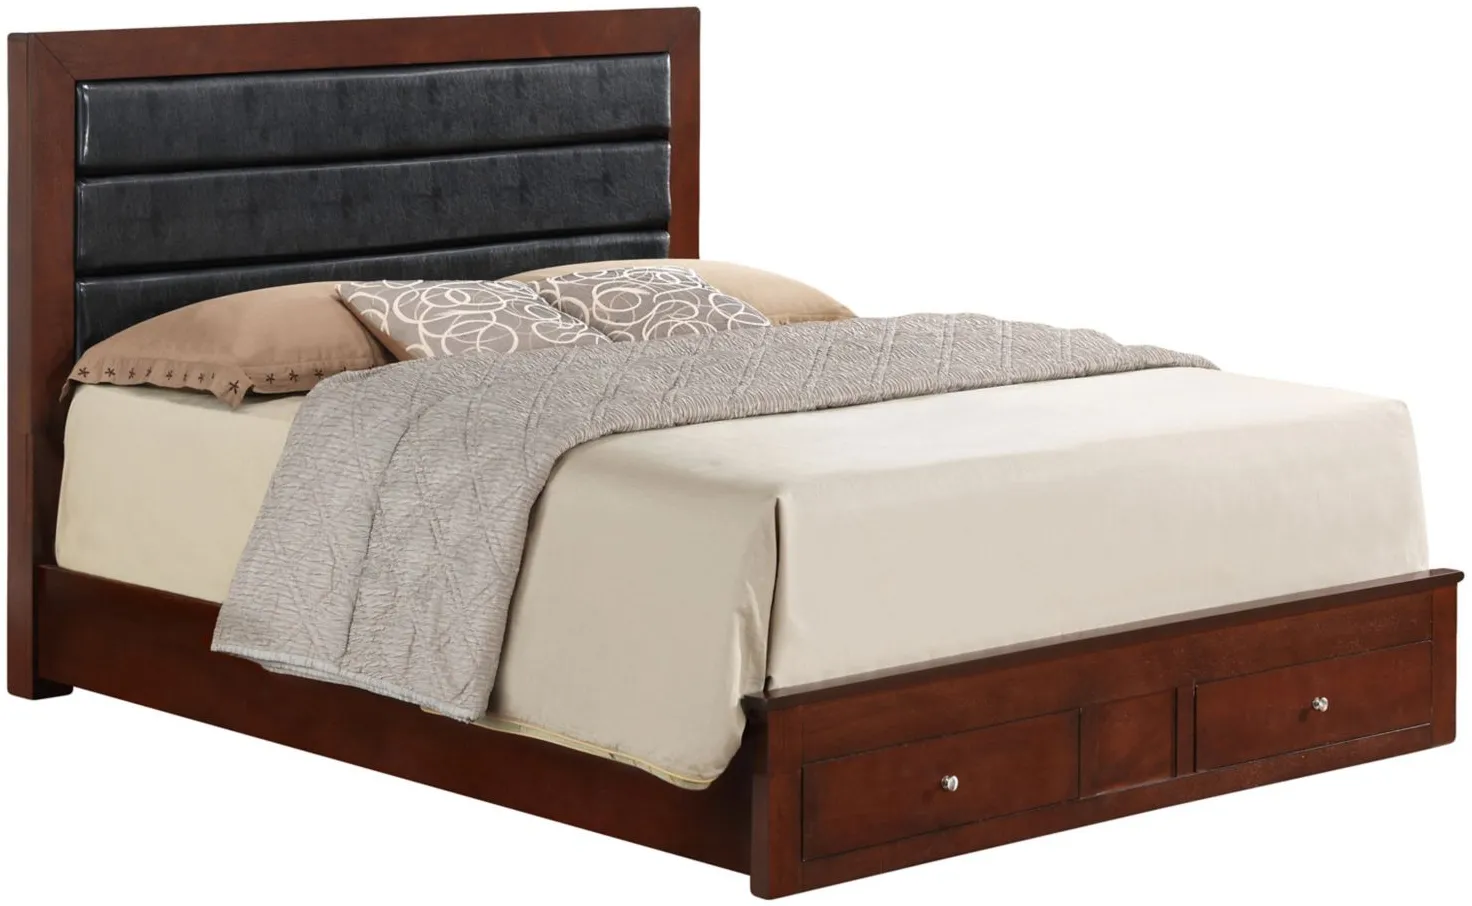 Burlington Queen Storage Bed in Cherry by Glory Furniture